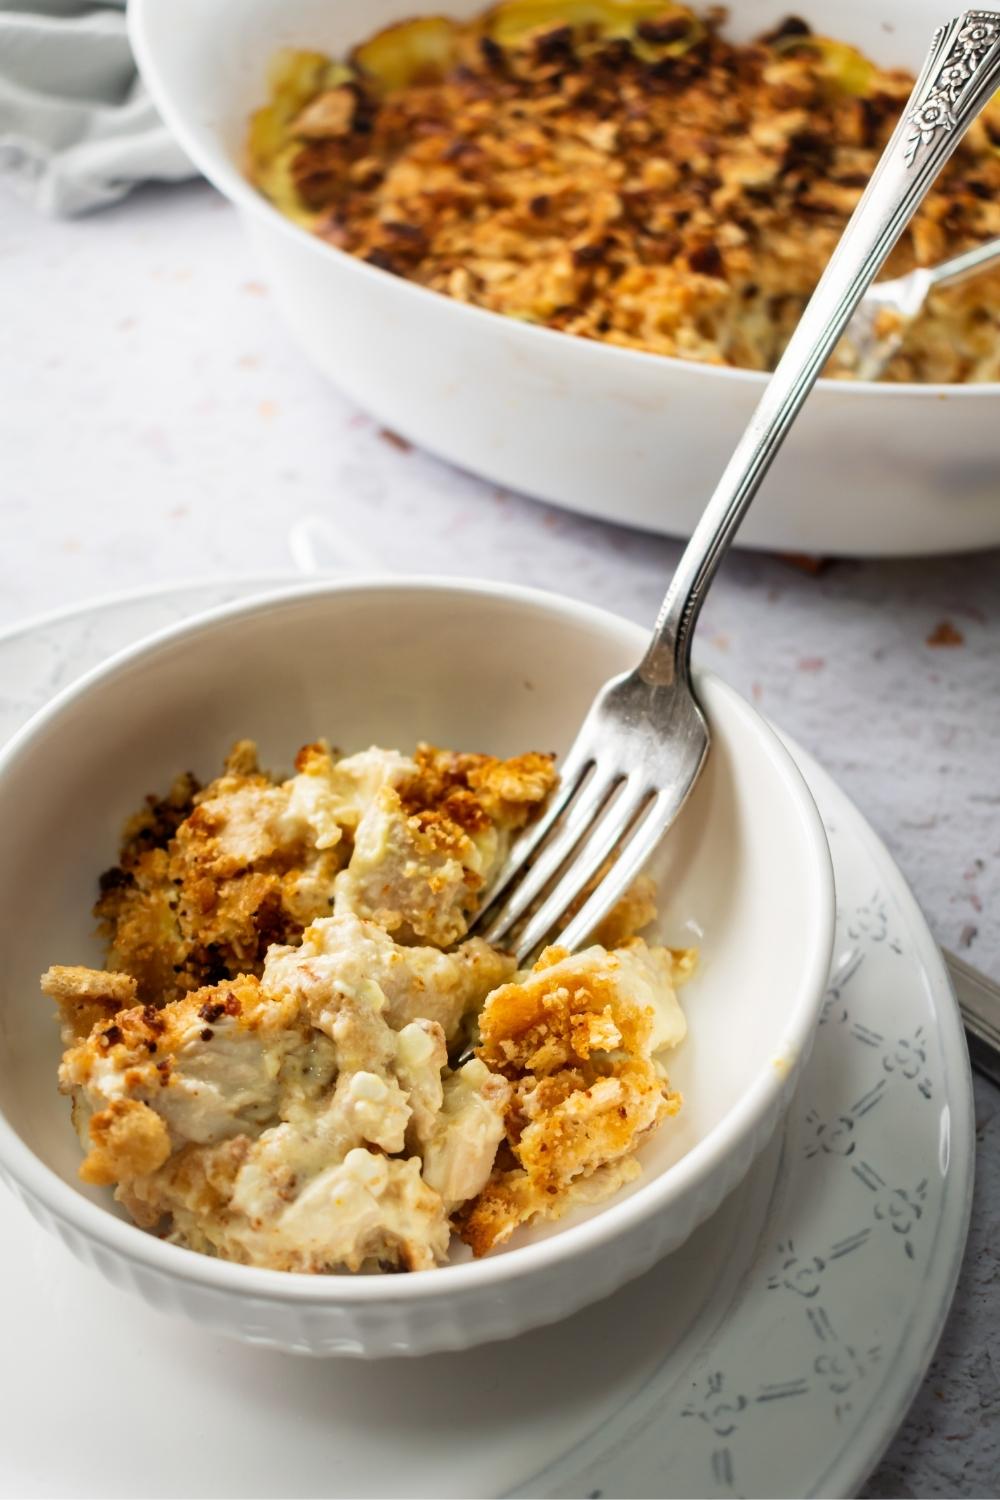 Cheesy chicken pieces with crushed up Ritz crackers on it in a white bowl that has a fork in it. Behind it is part of a casserole dish filled with million dollar casserole.